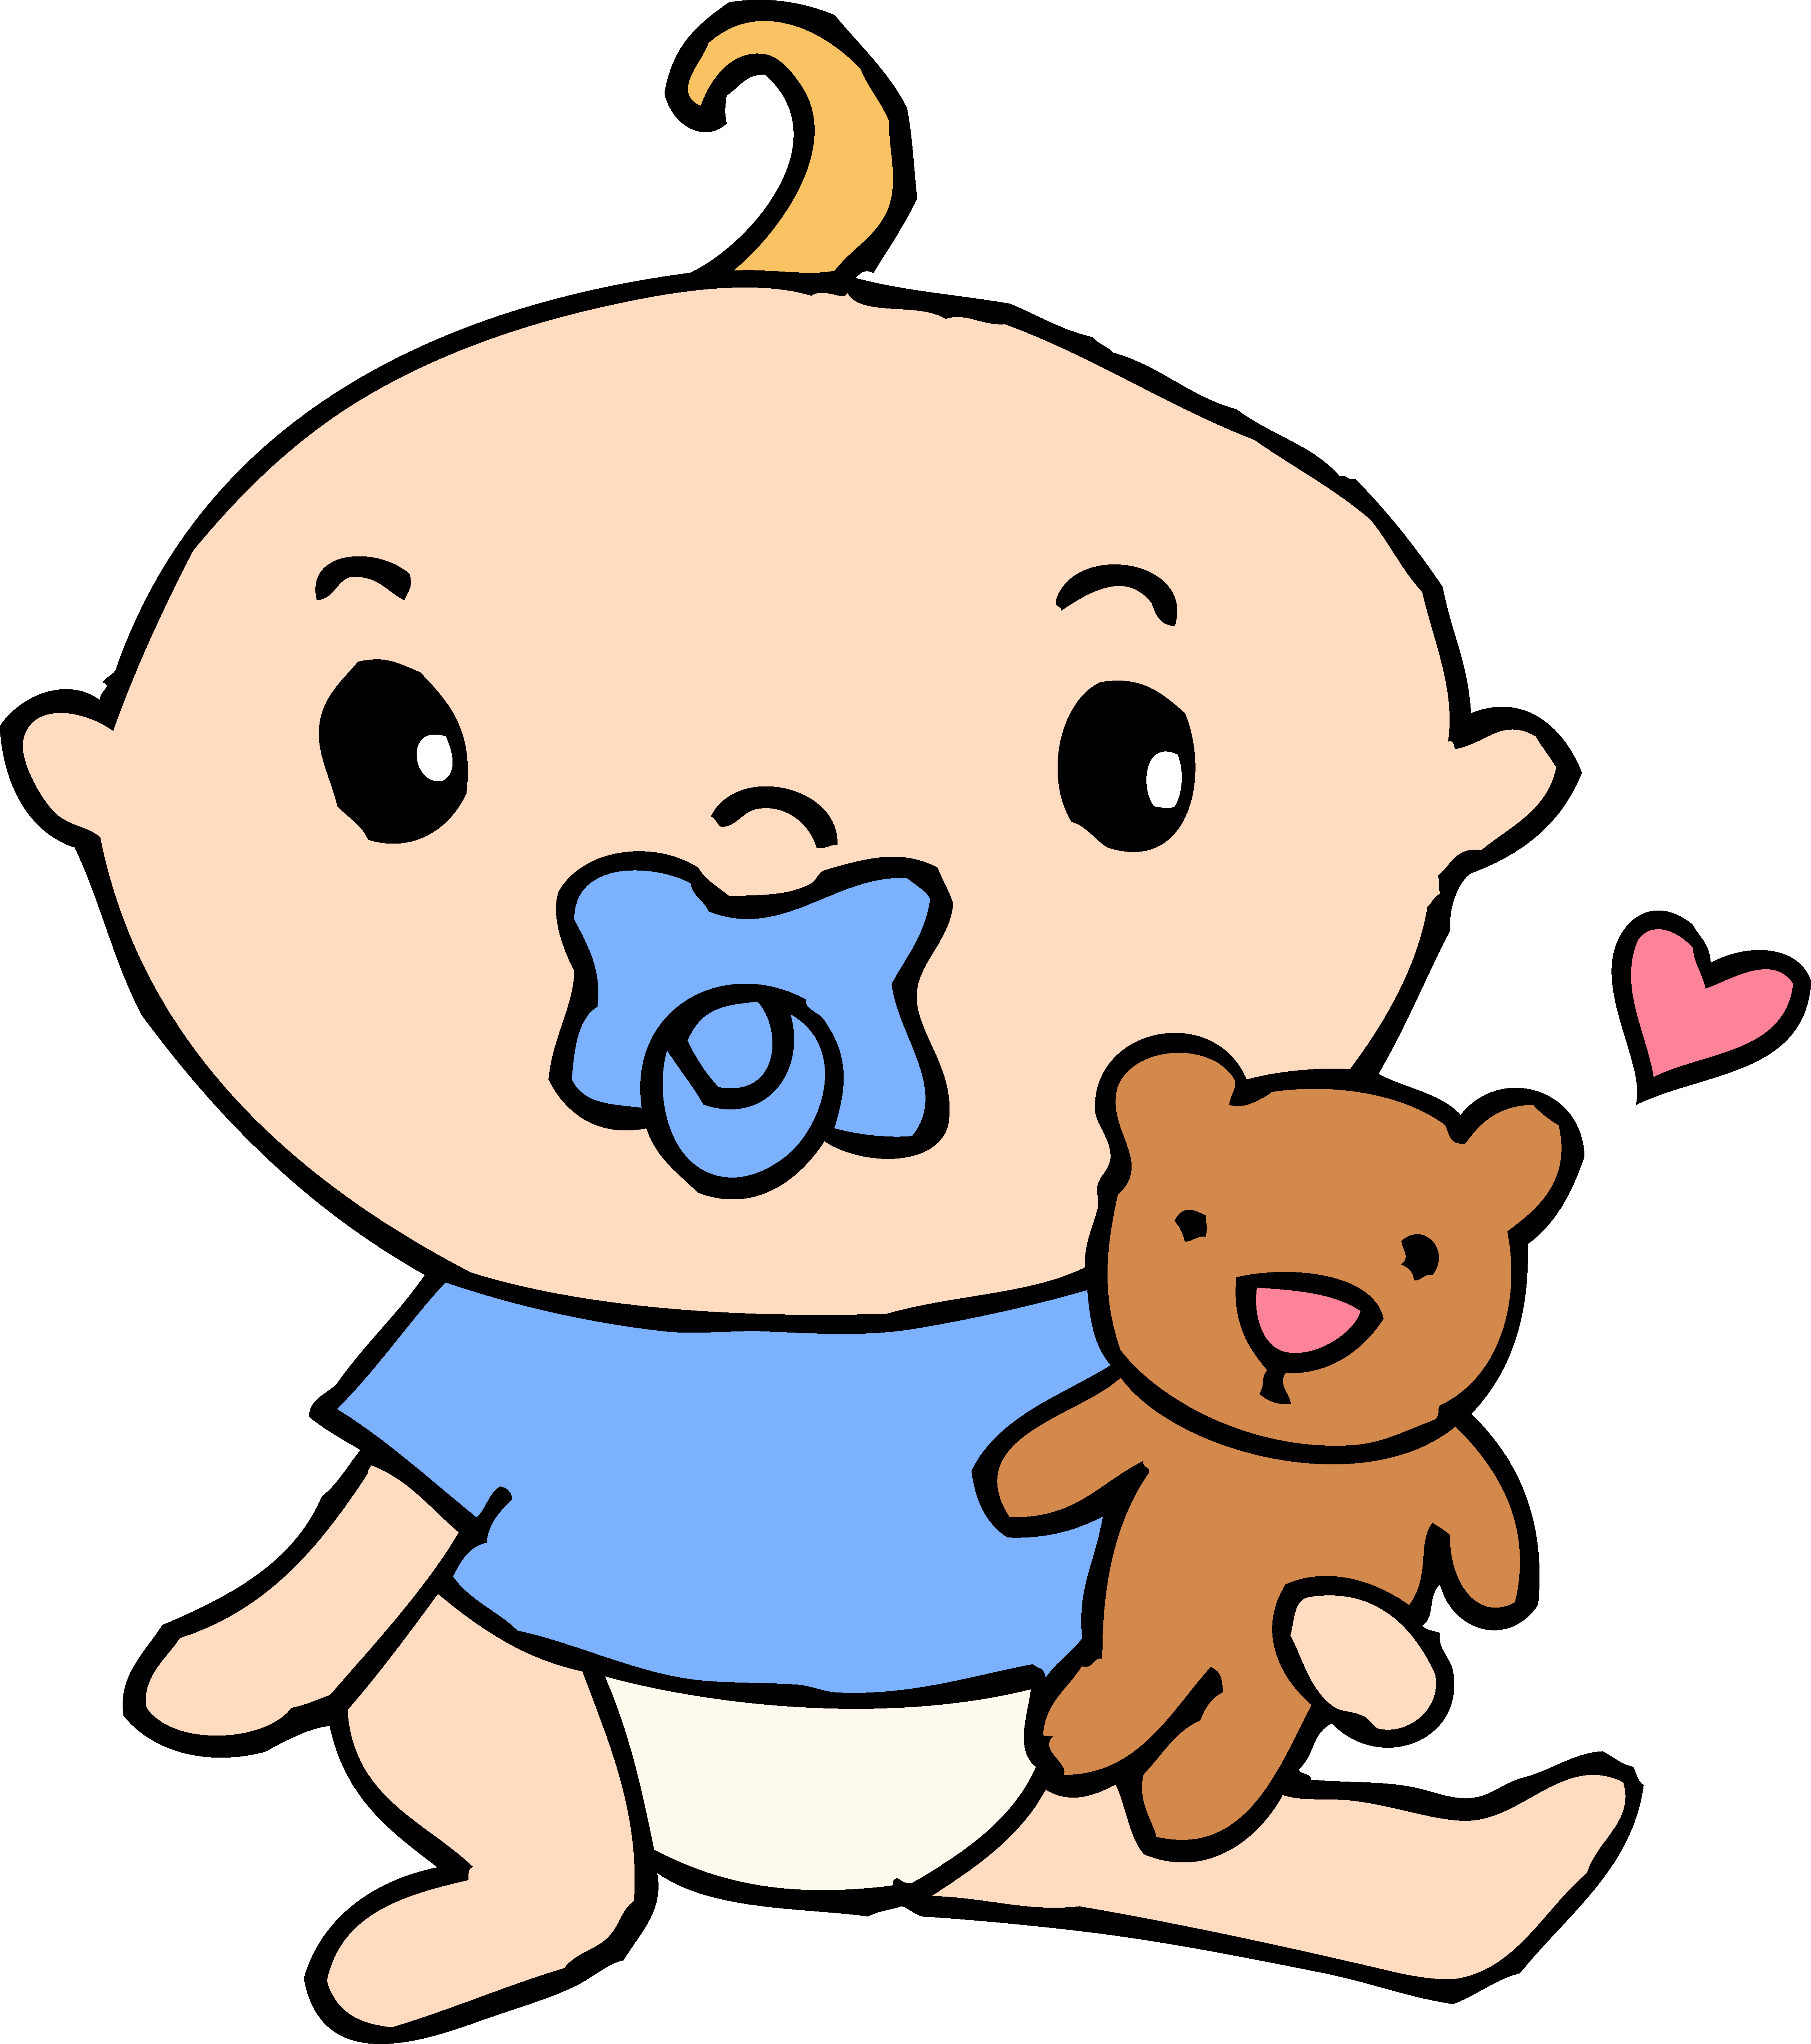 Baby rattle vintage baby illustrations clipart boy with rattle free